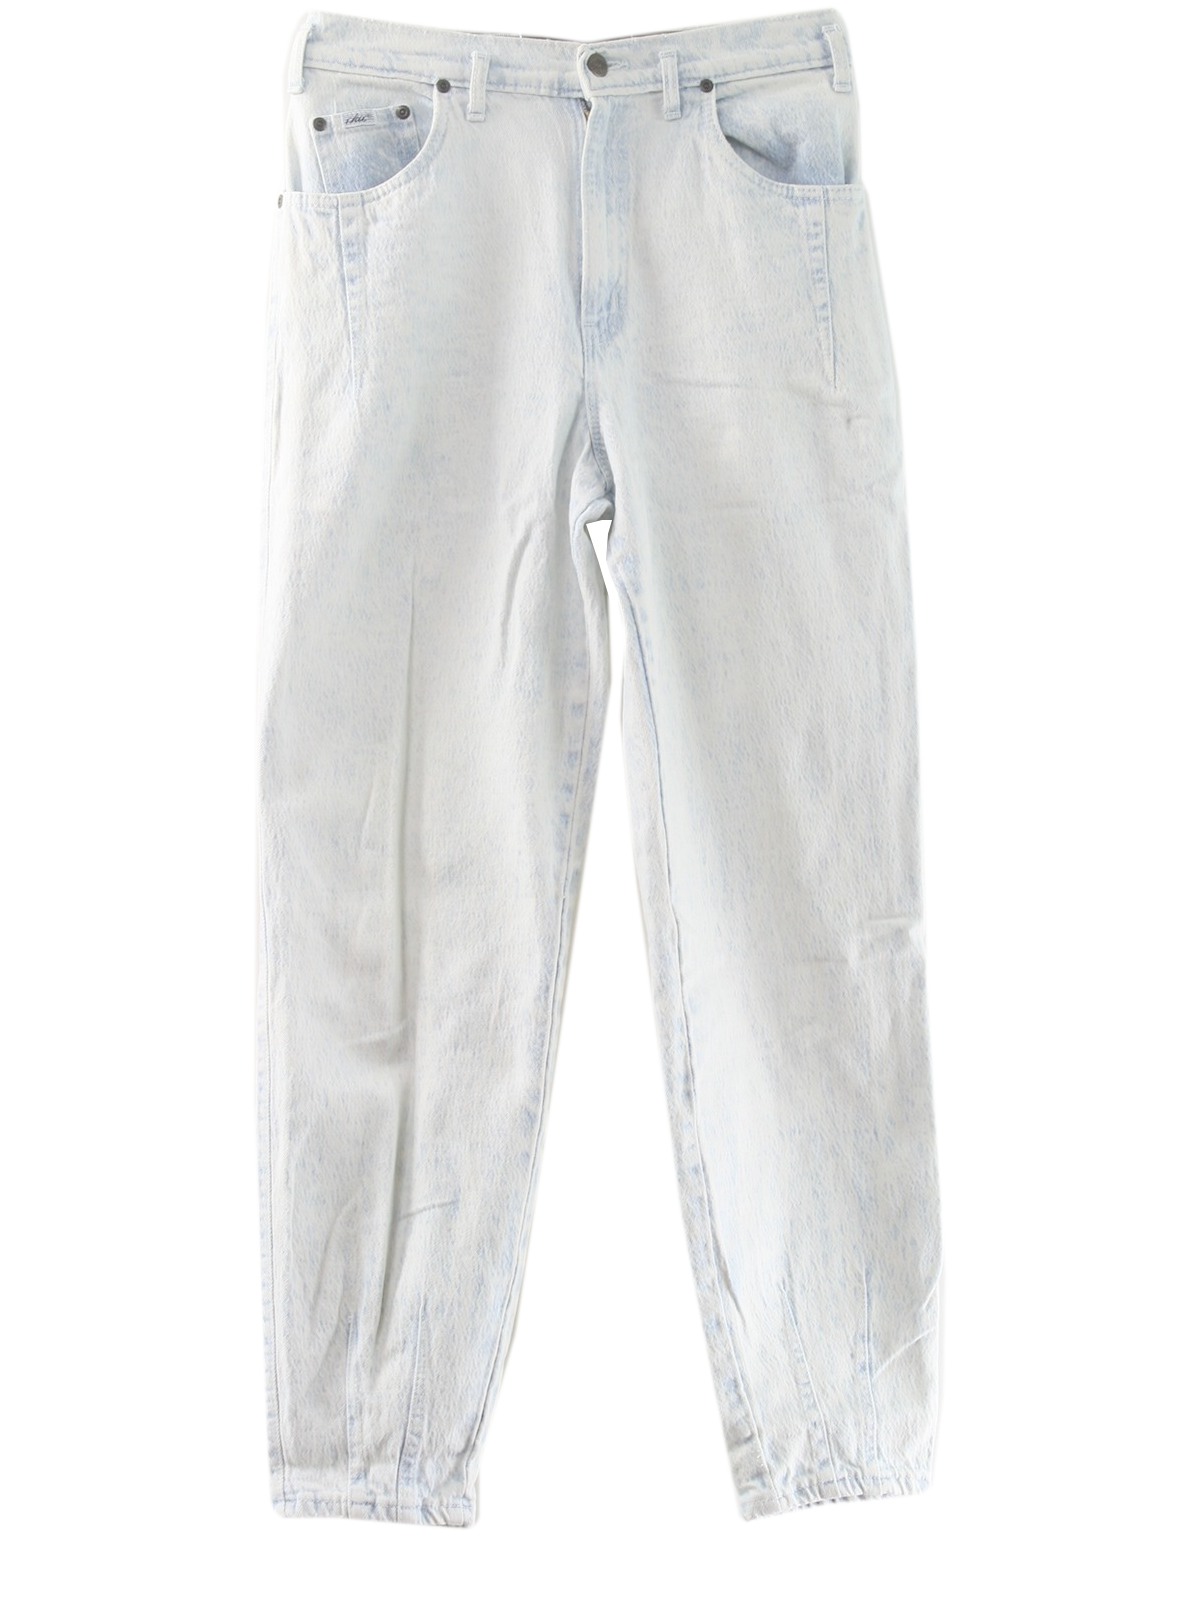 80s Retro Pants: 80s -Chic- Womens light blue denim background with ...